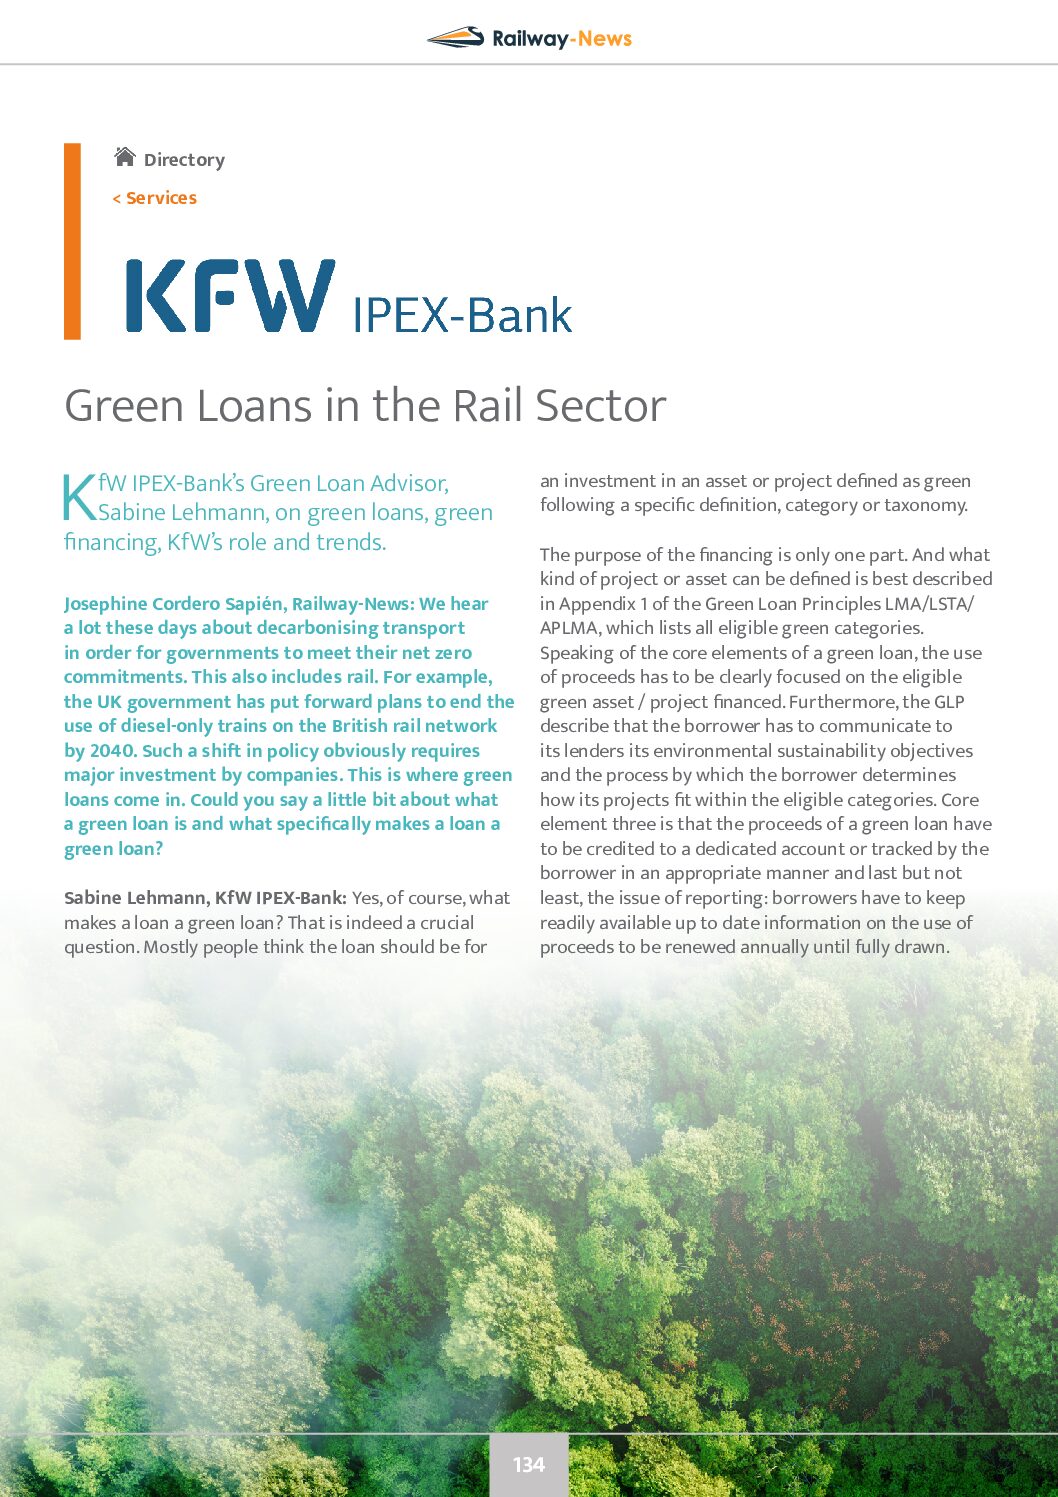 Green Loans in the Rail Sector